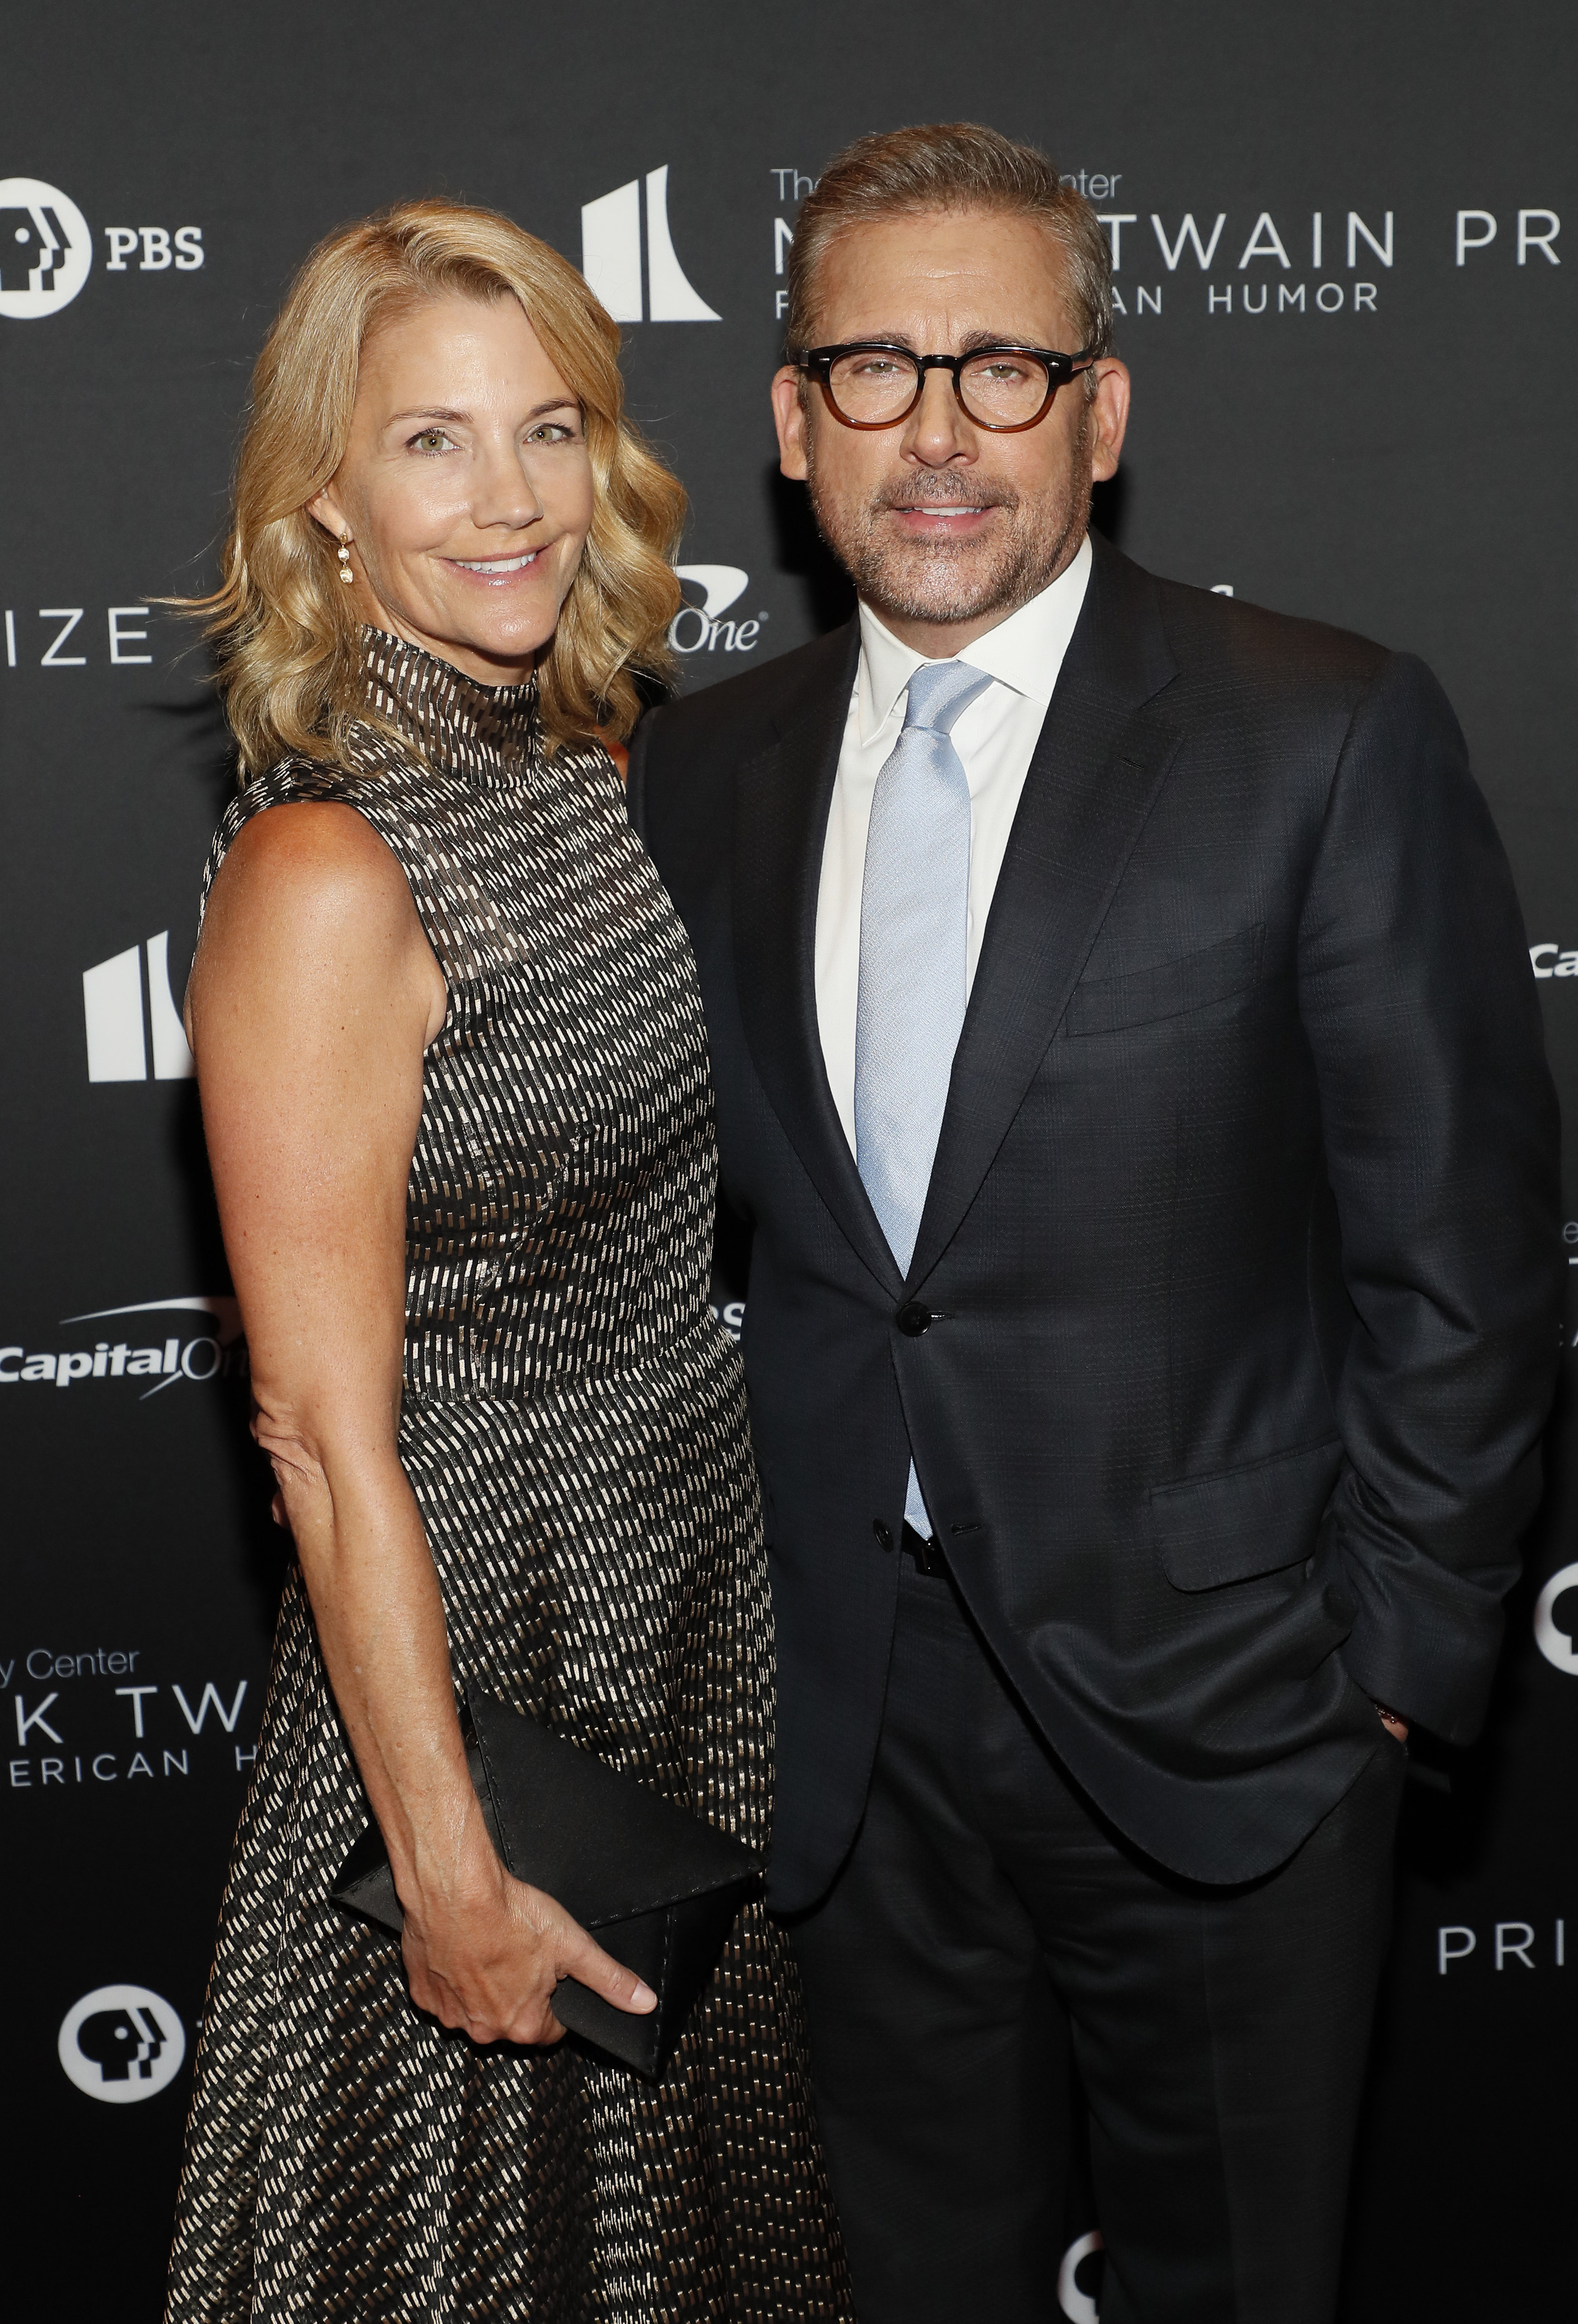 Steve and Nancy Carell on the red carpet